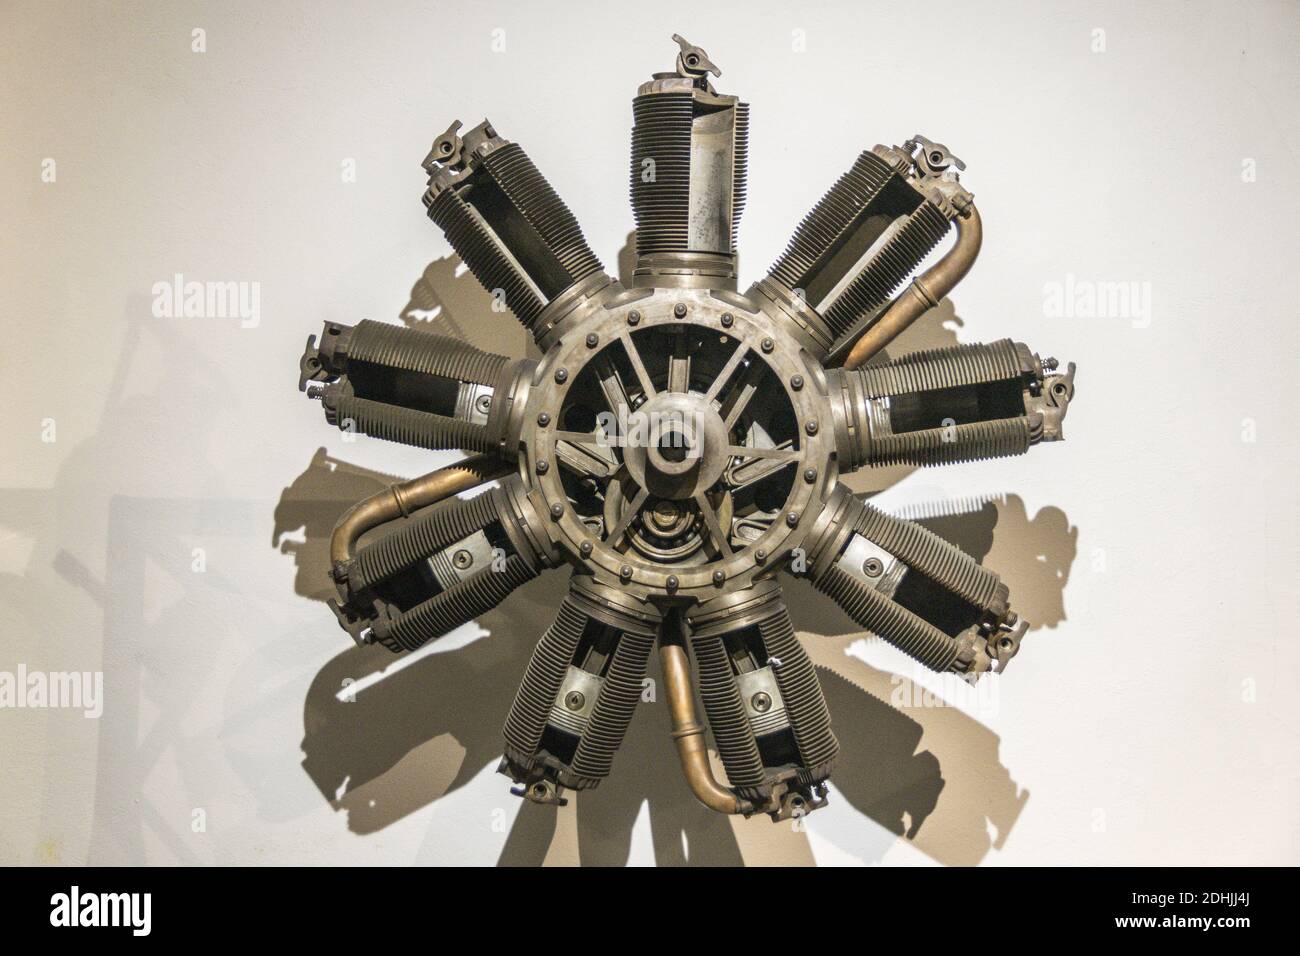 A closeup shot of an industrial steel radial piston internal combustion engine Stock Photo